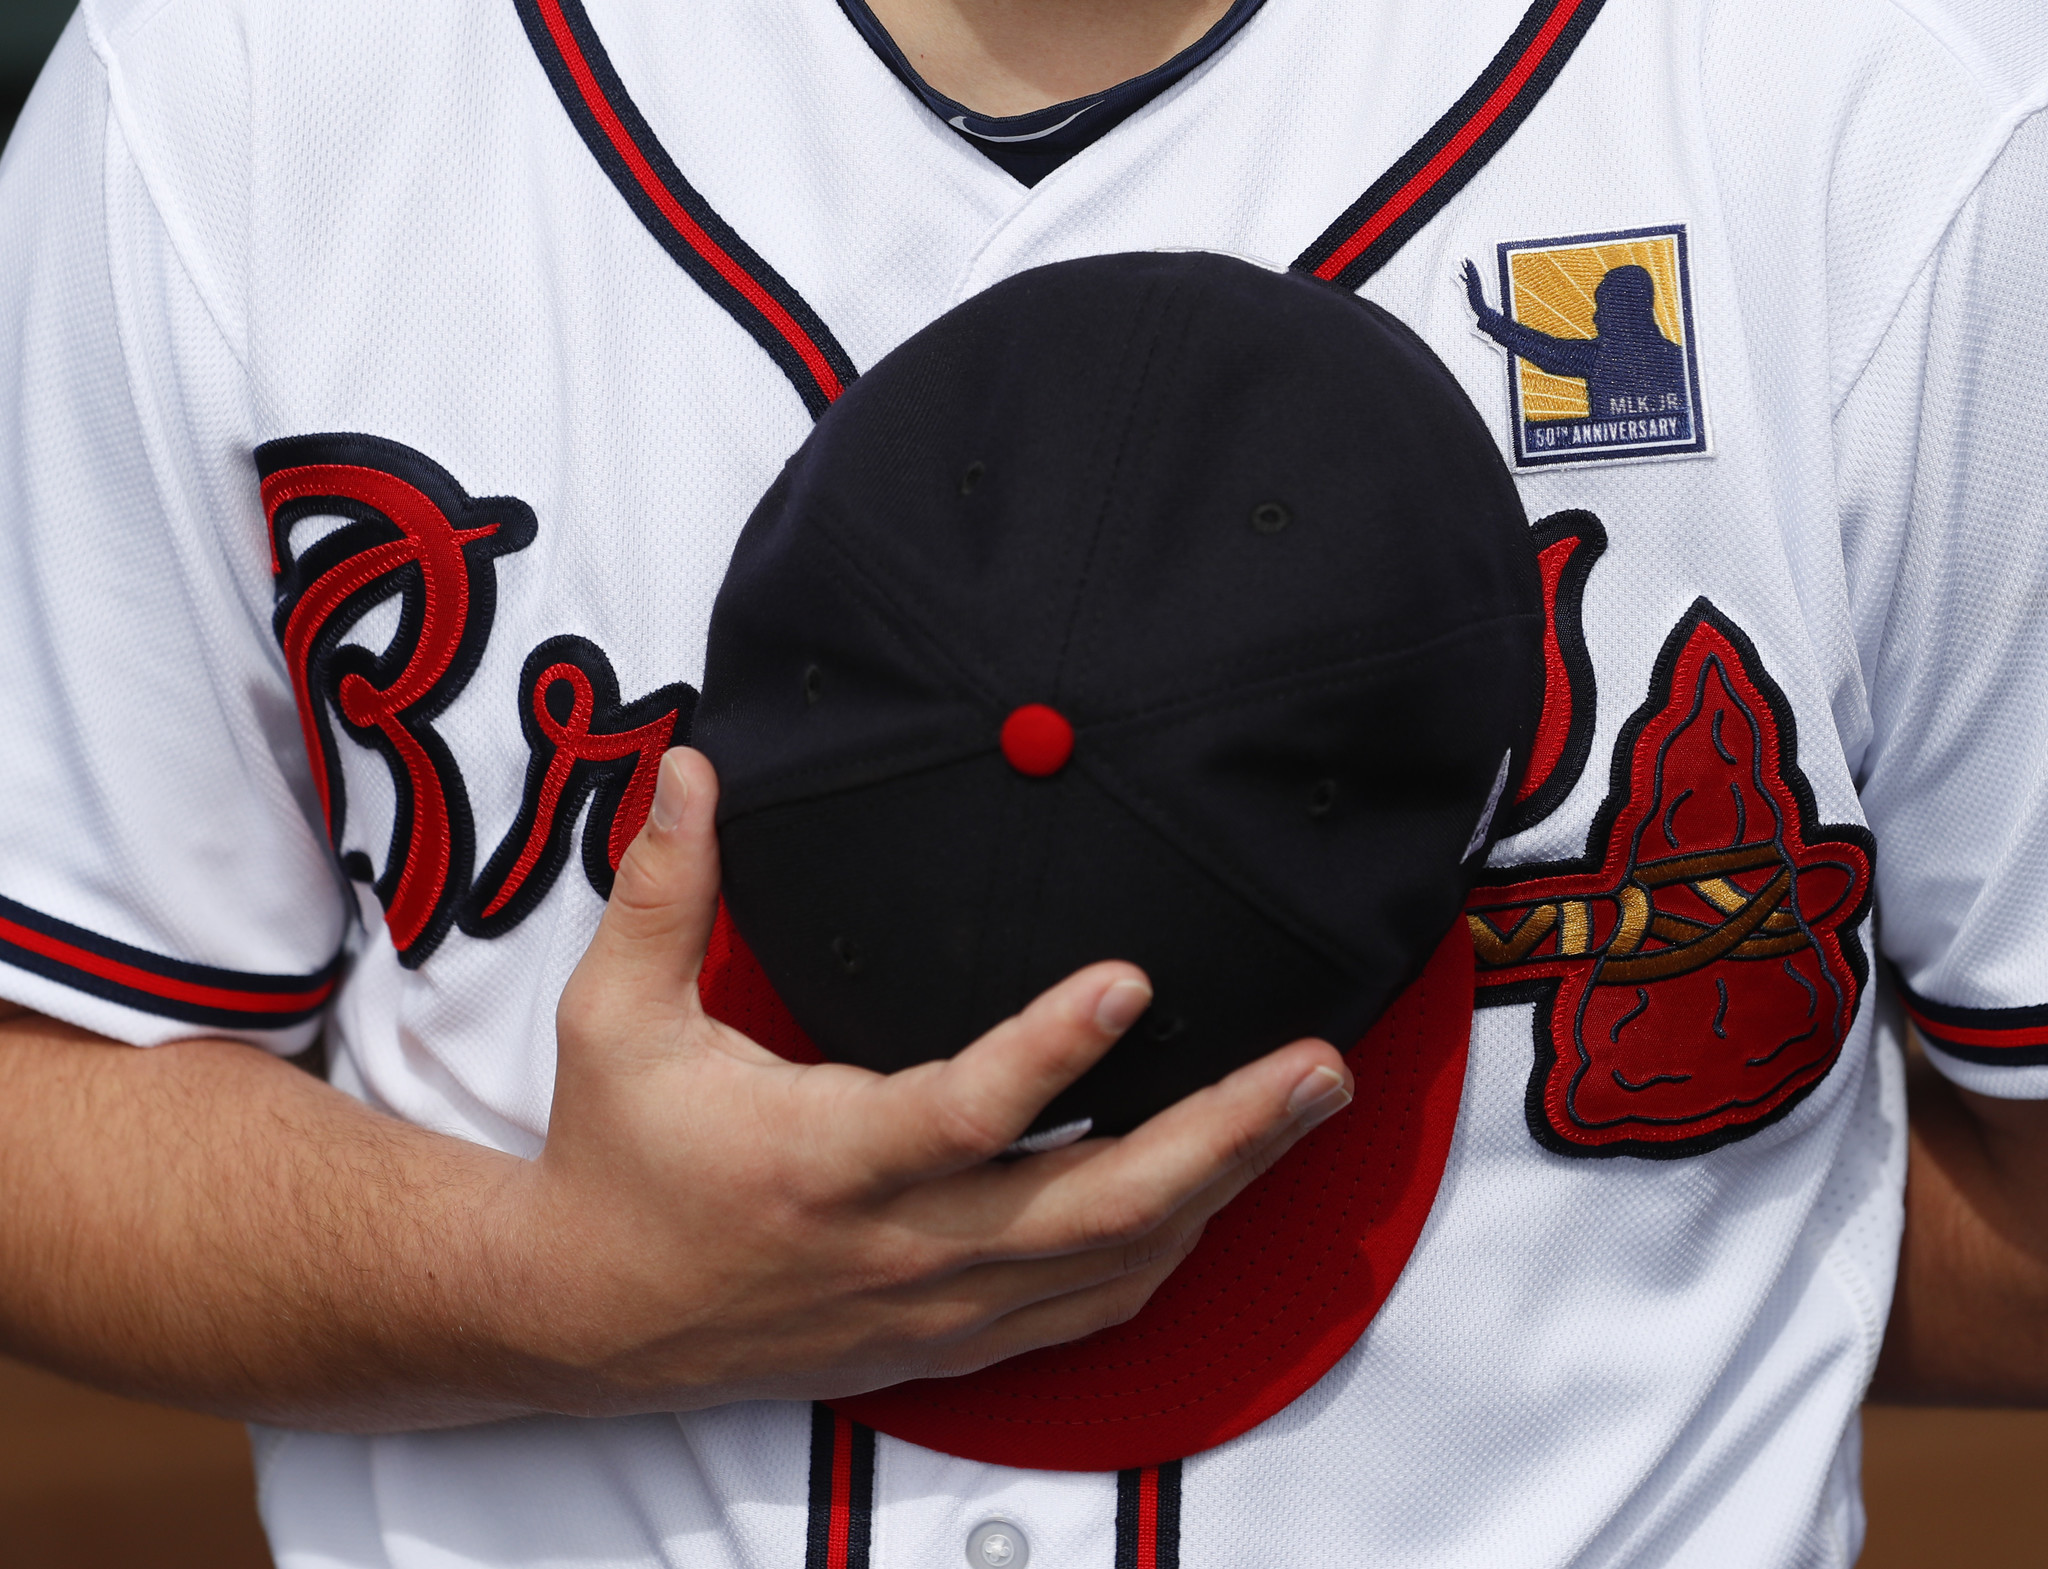 A member of the Braves staff wears a patch on his uniform marking the 50th anniversary of the death